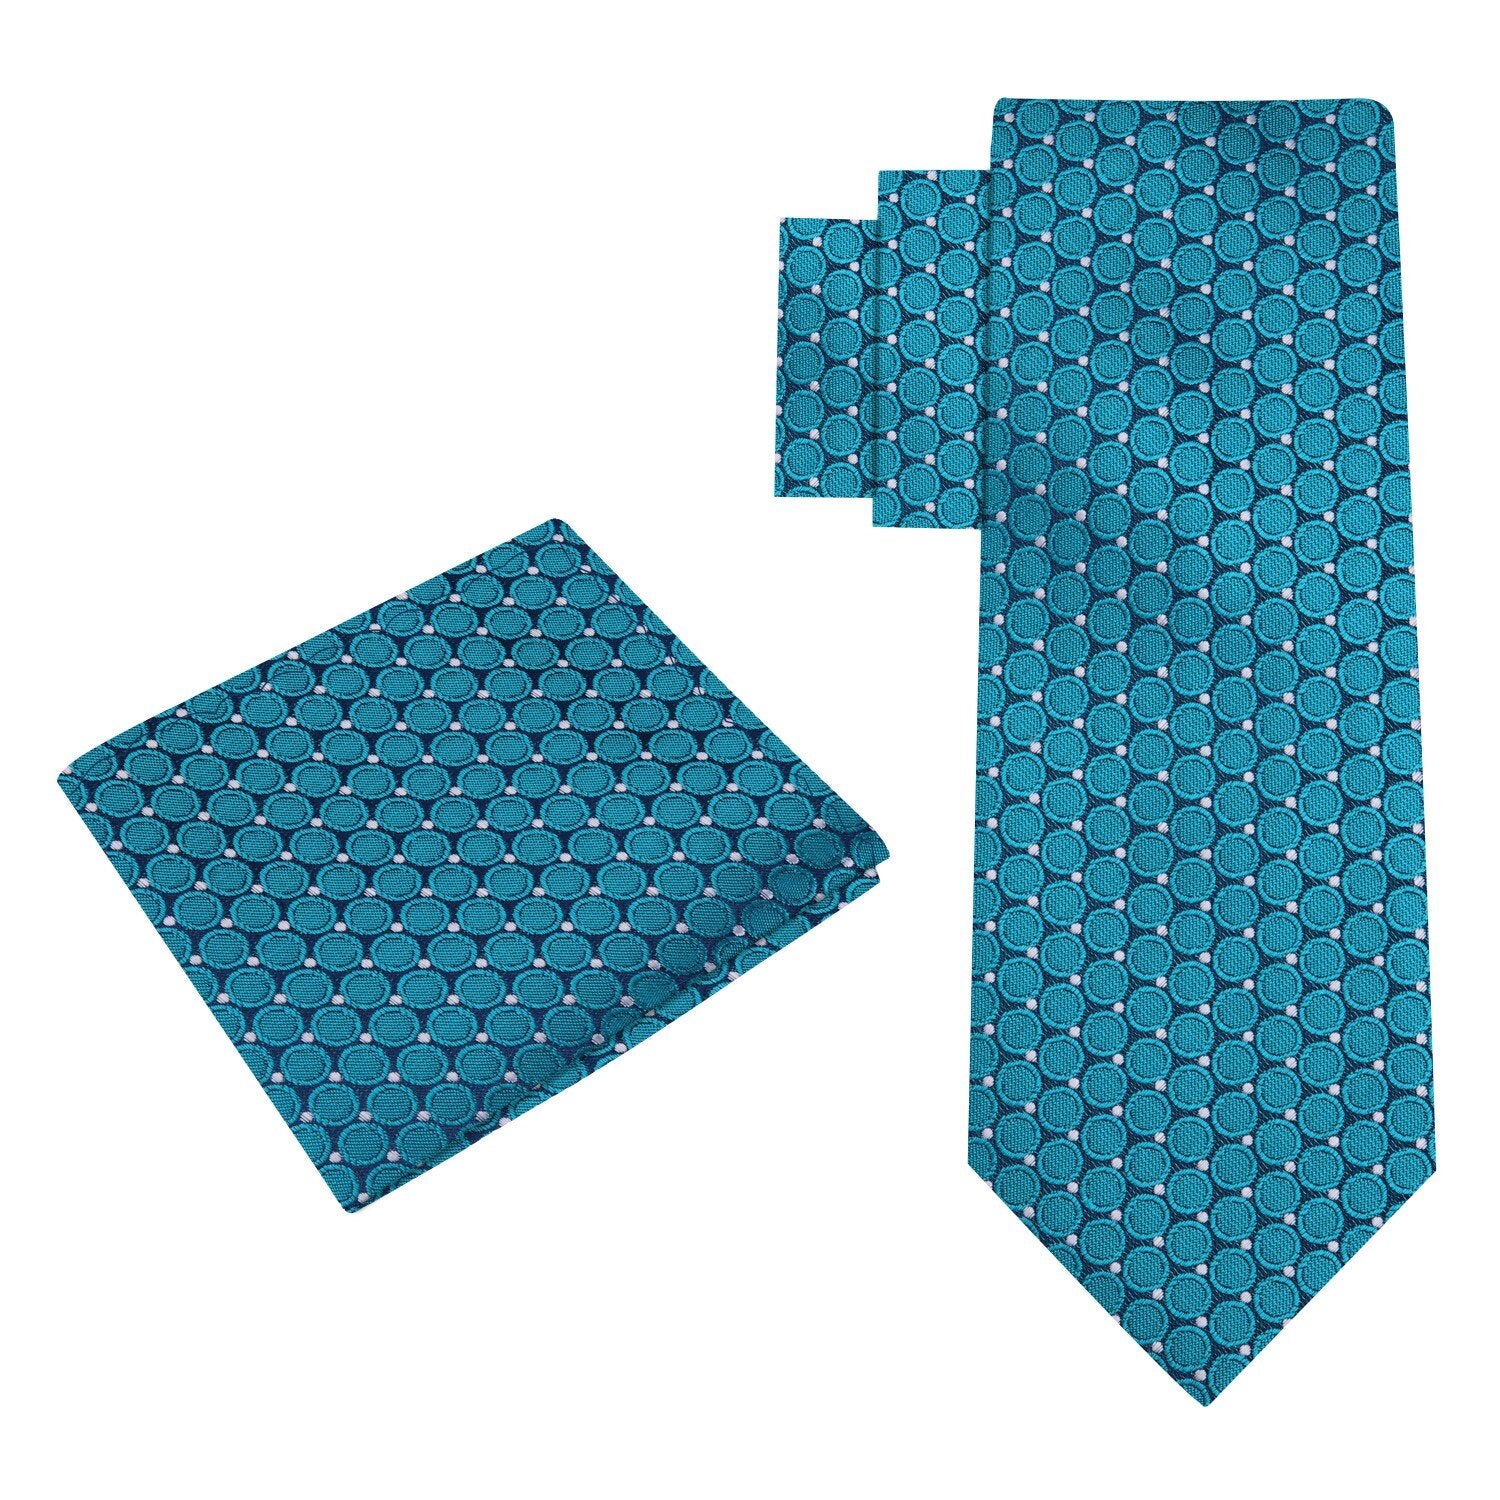 Alt View: Teal, Blue Circles Tie and Square